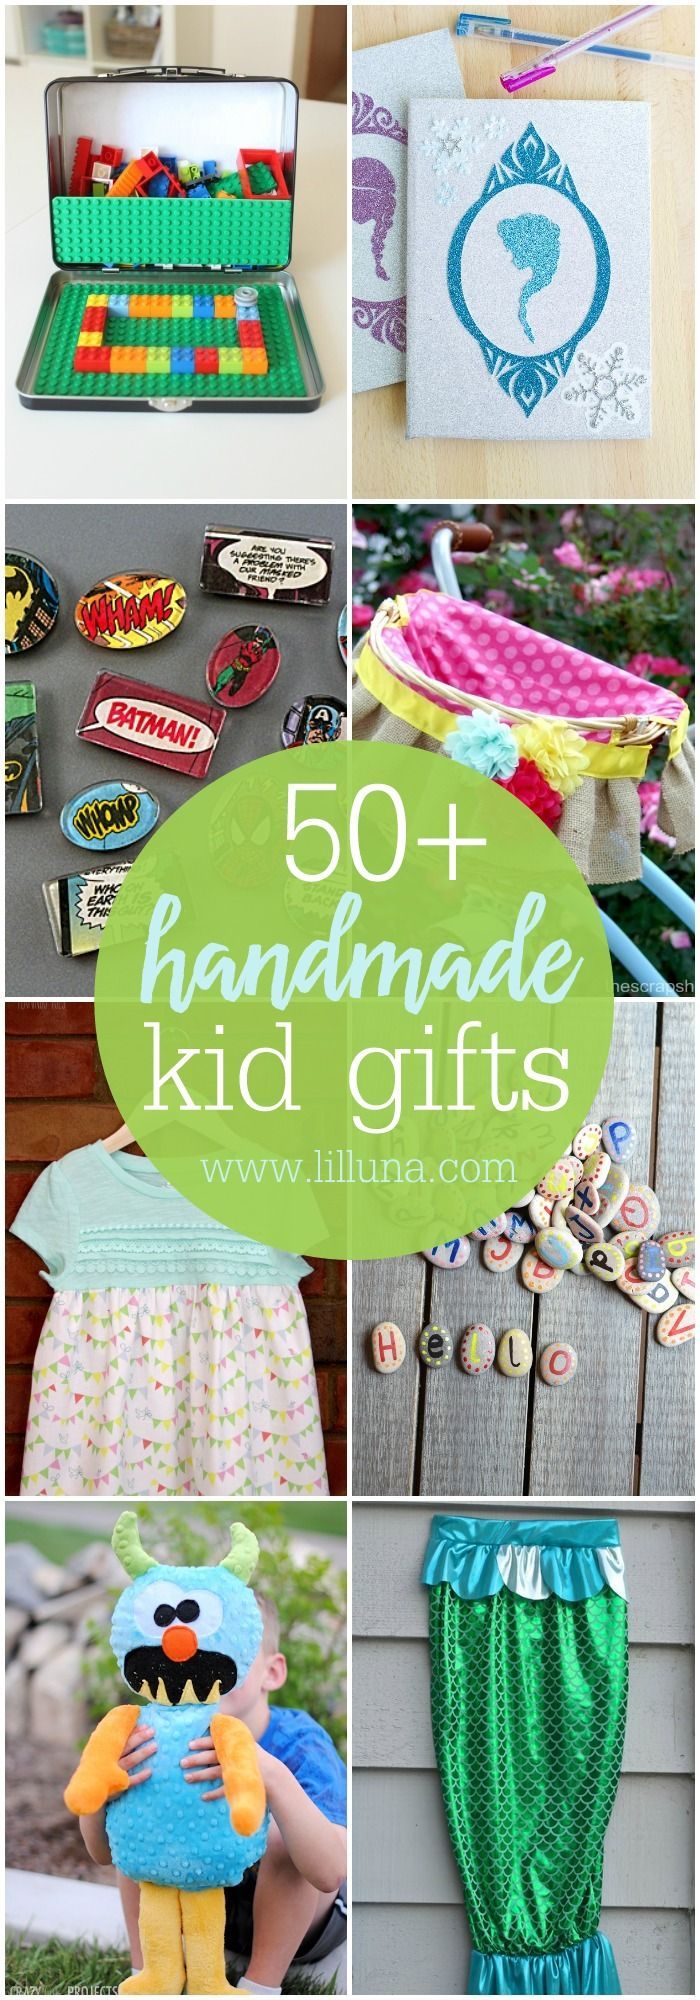 75+ DIY Gifts For Kids - 75+ DIY Gifts For Kids -   19 diy Gifts for kids ideas